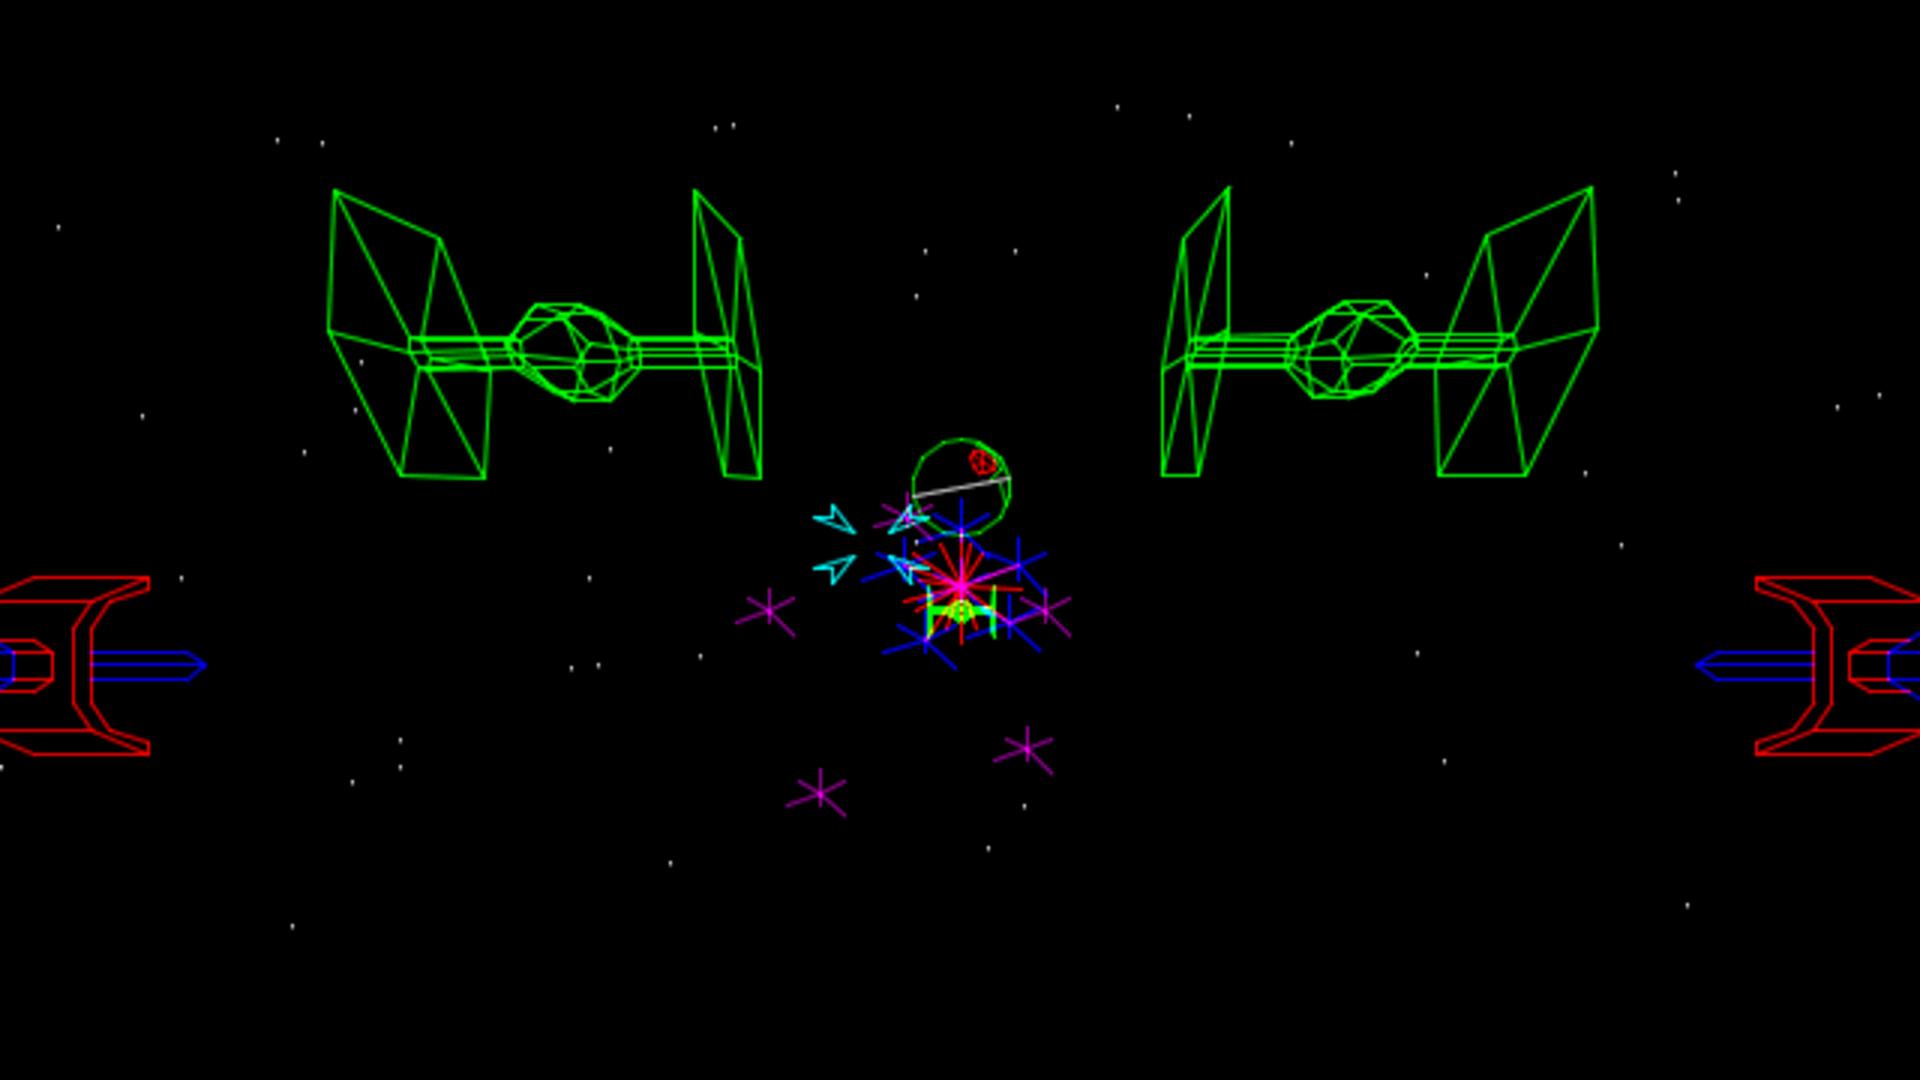 A screenshot from the Star Wars arcade game